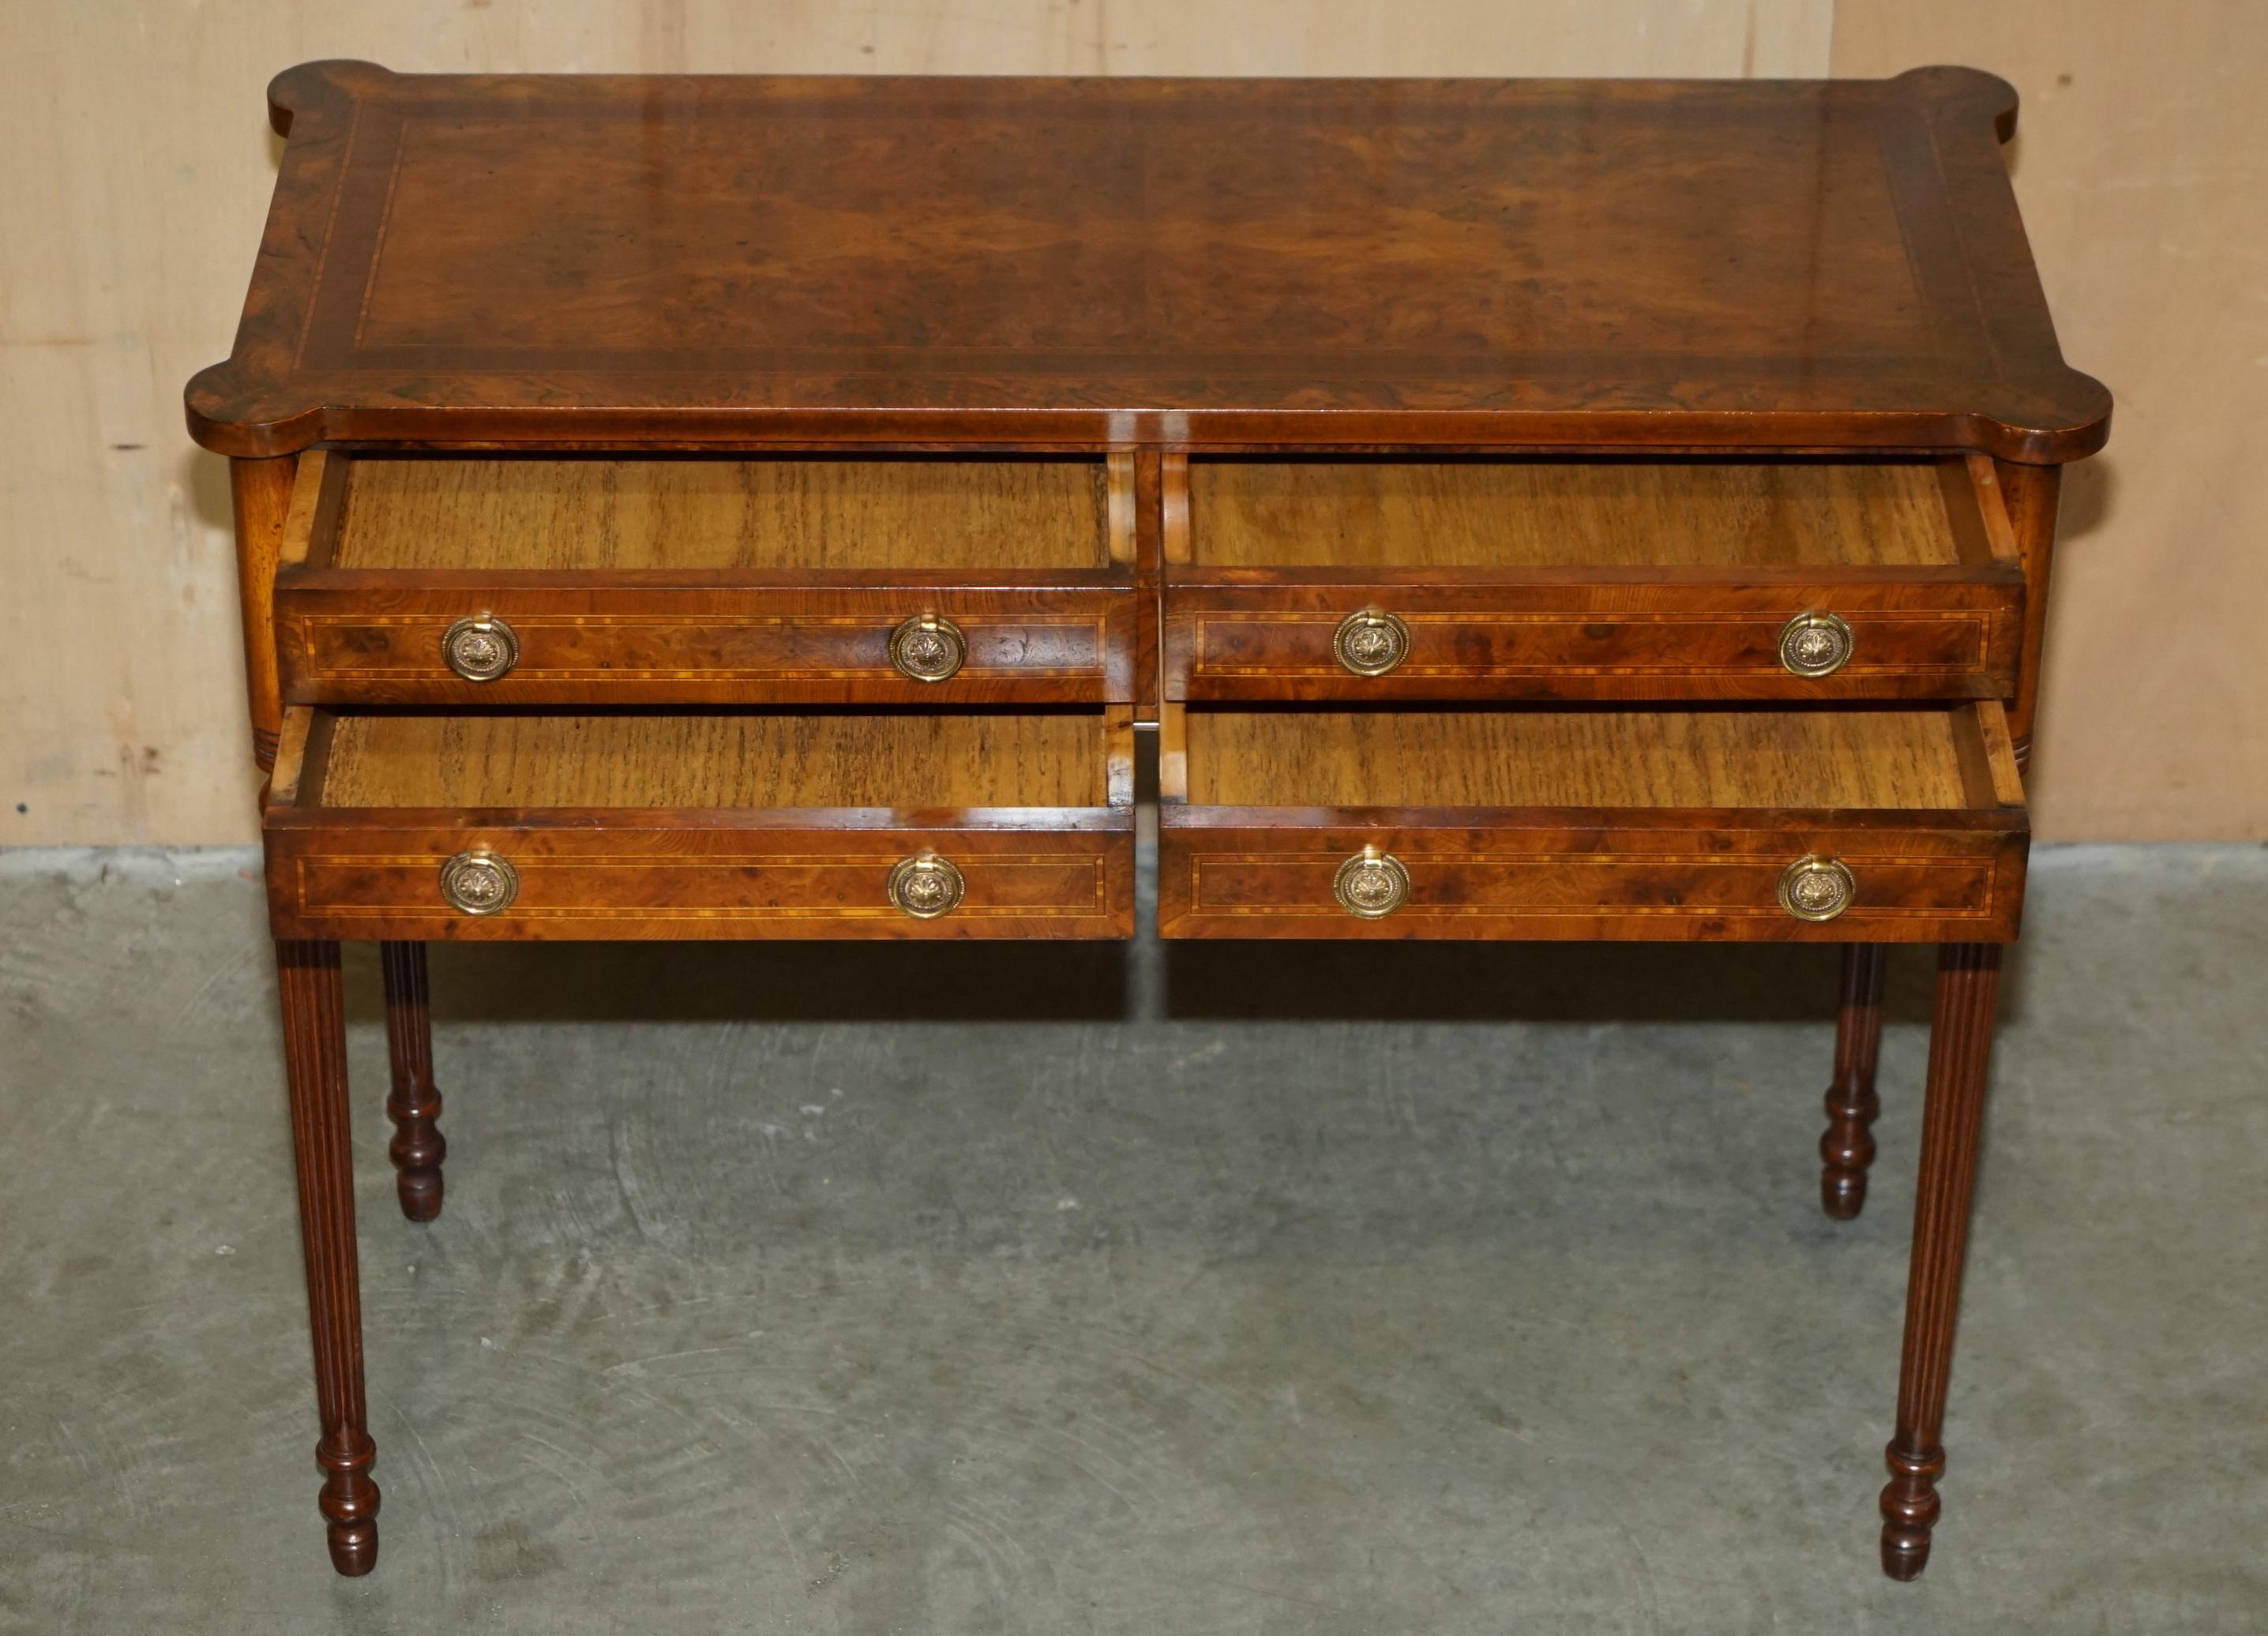 EXQUISITE CIRCA 1920 BURR ELM & SATiNWOOD FRENCH POLISHED RESTORED CONSOLE TABLE For Sale 11